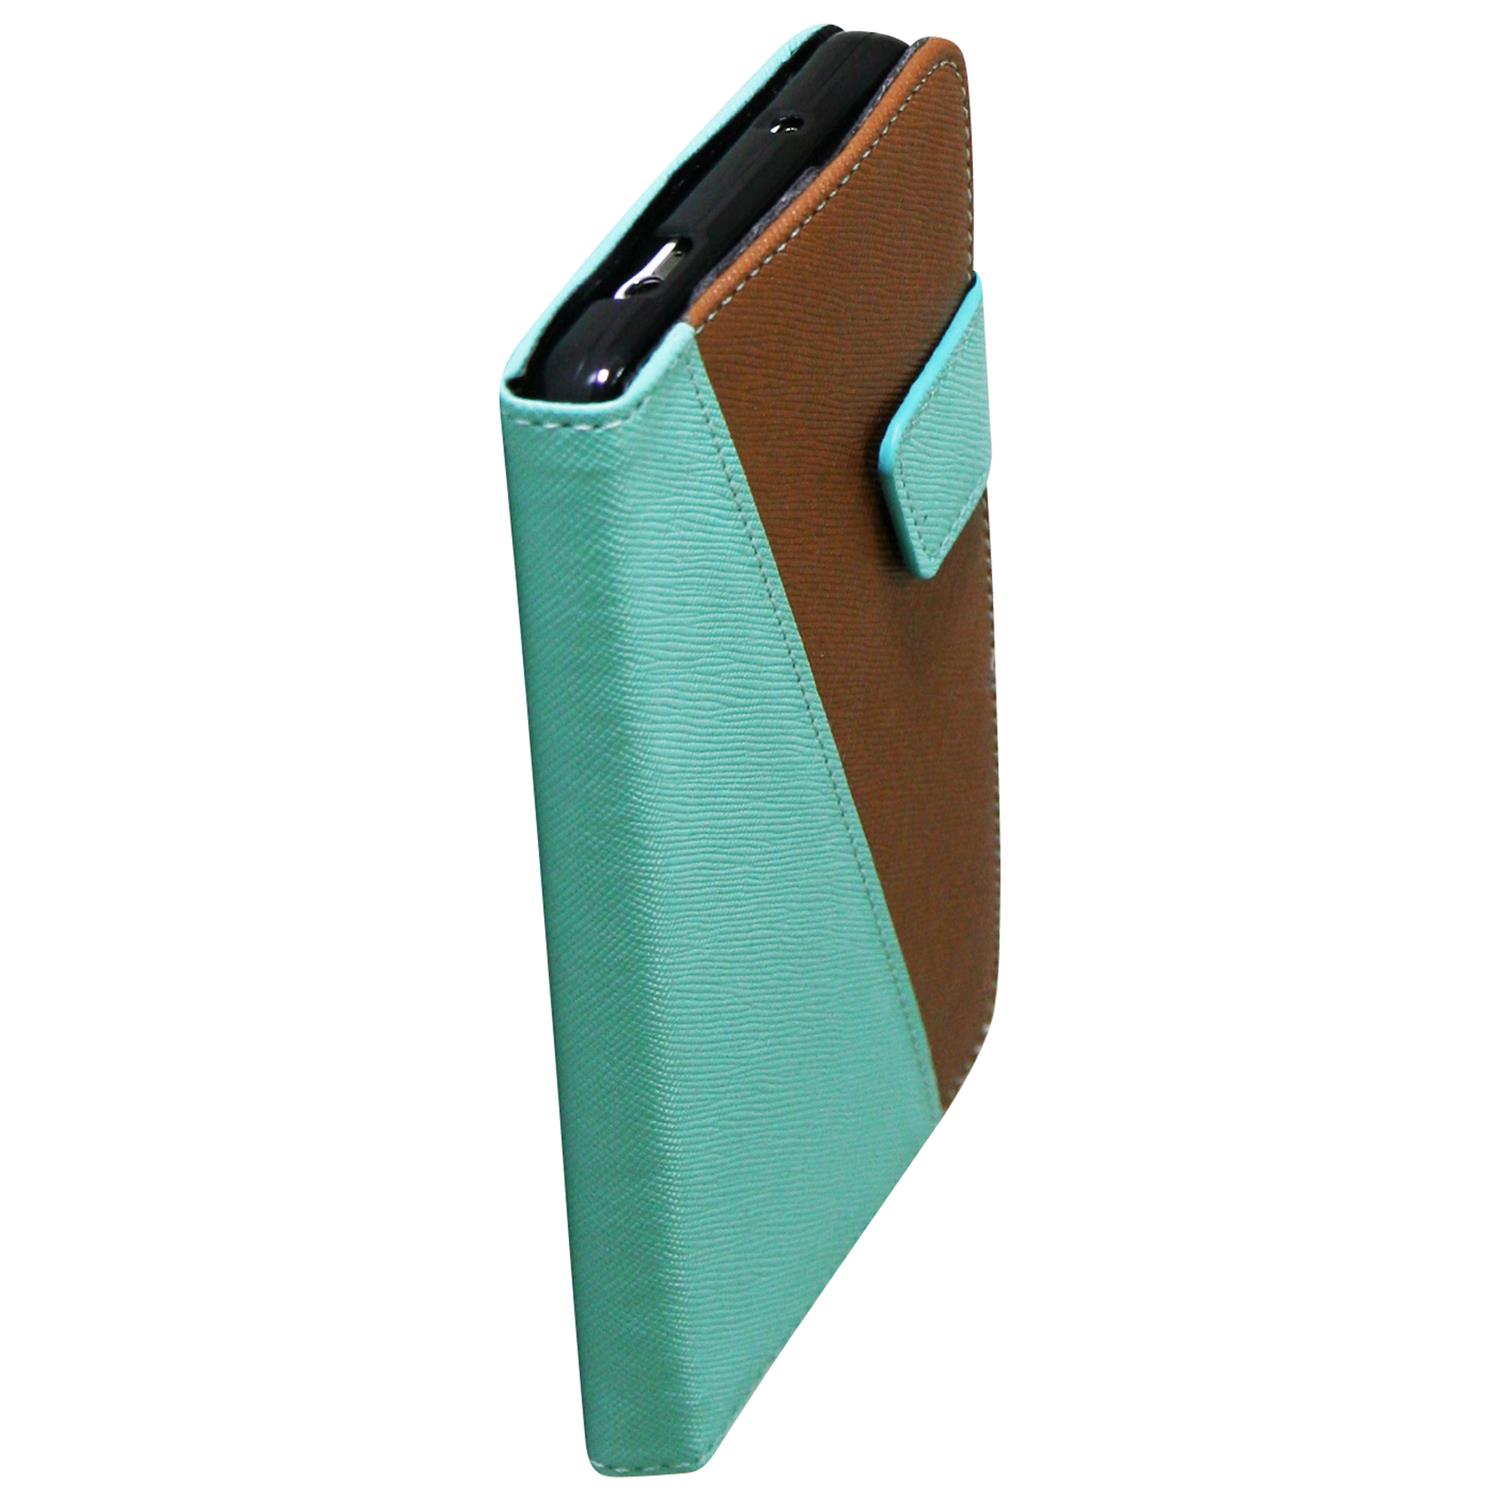 Exian Samsung Galaxy Note 3 PU Leather Wallet 2-Tone Color Green/Brown